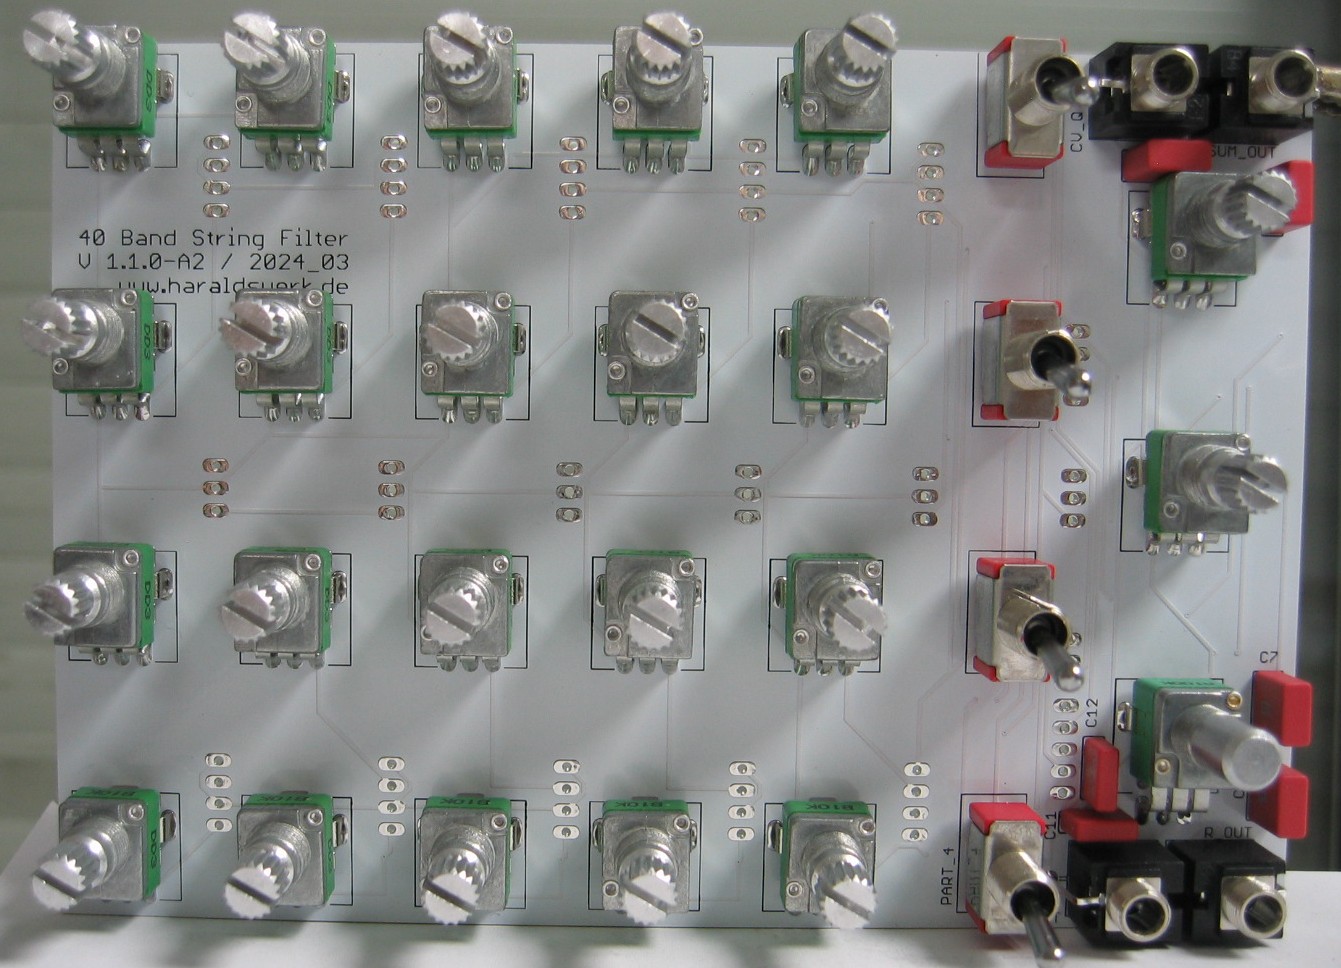 40 Band (String) Filter populated control PCB right